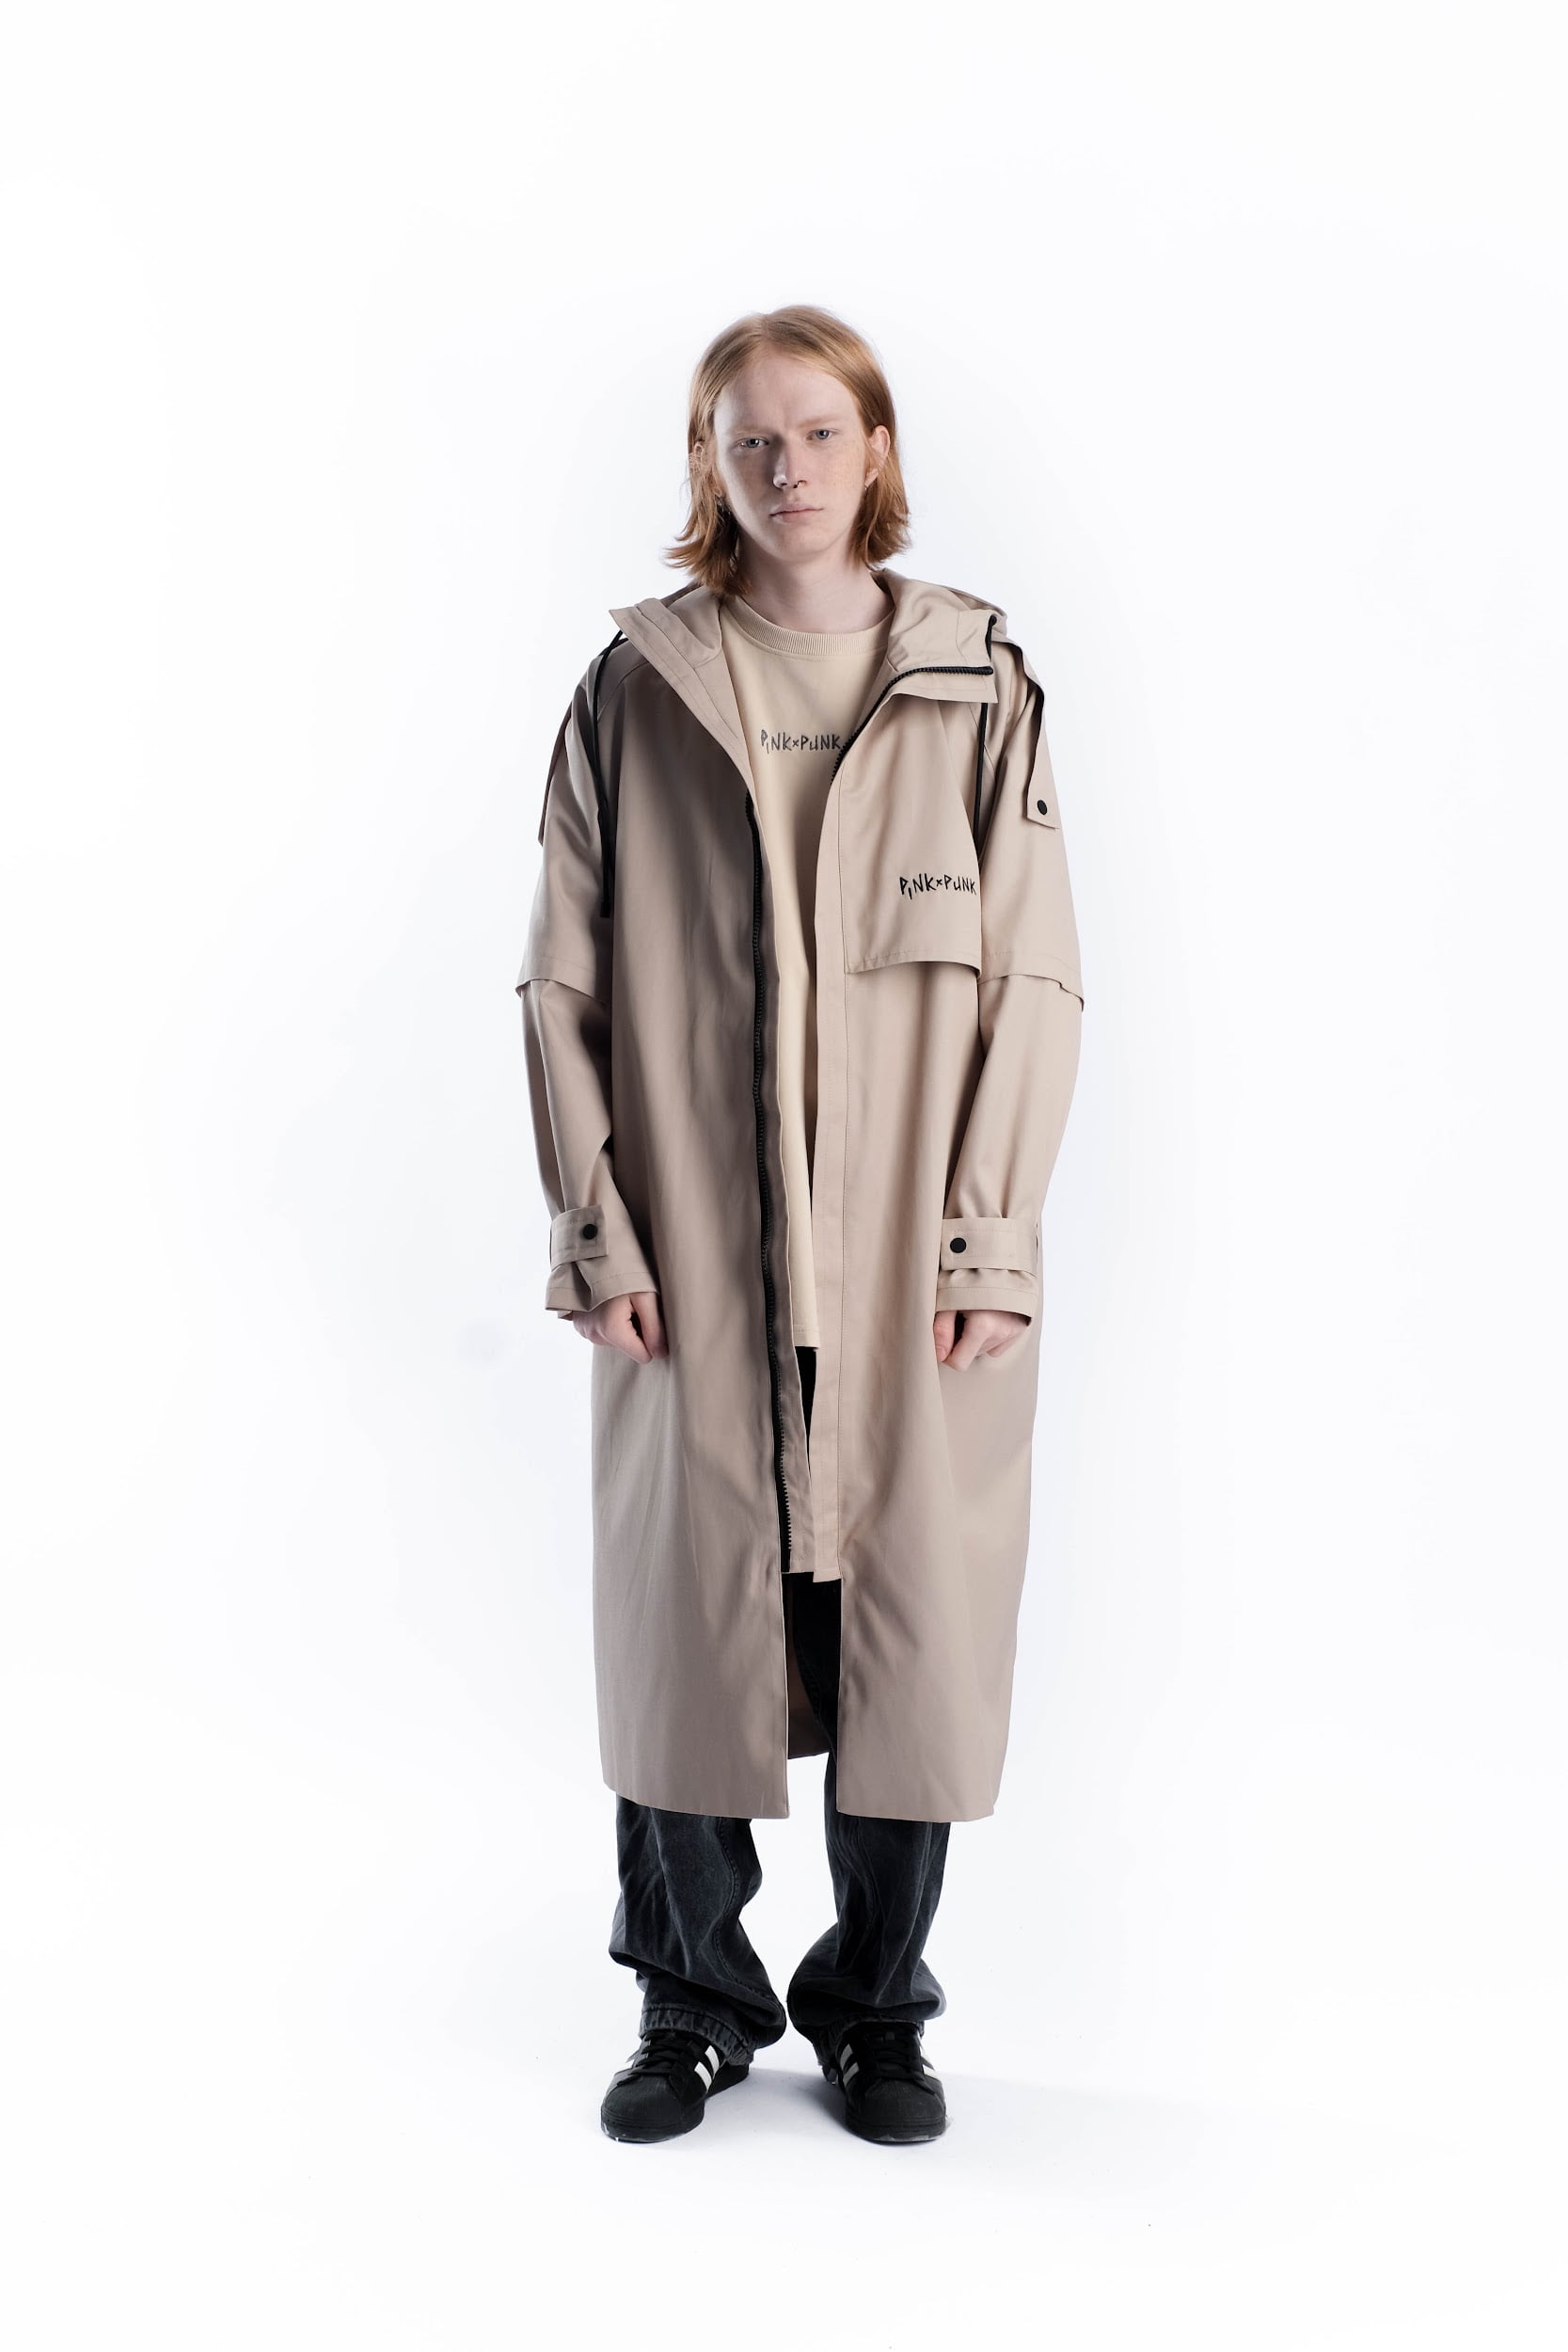 <p>PinkPunk designer trench coat. It is specially designed so that you don't look like everyone else in spring and autumn. It features a stylish asymmetrical yoke, high-quality hardware, adjustable sleeve width, and a hood.</p><p>Composition: 80% cotton 20% polyester</p><p>Lining composition: 45% cotton 55% polyester</p>